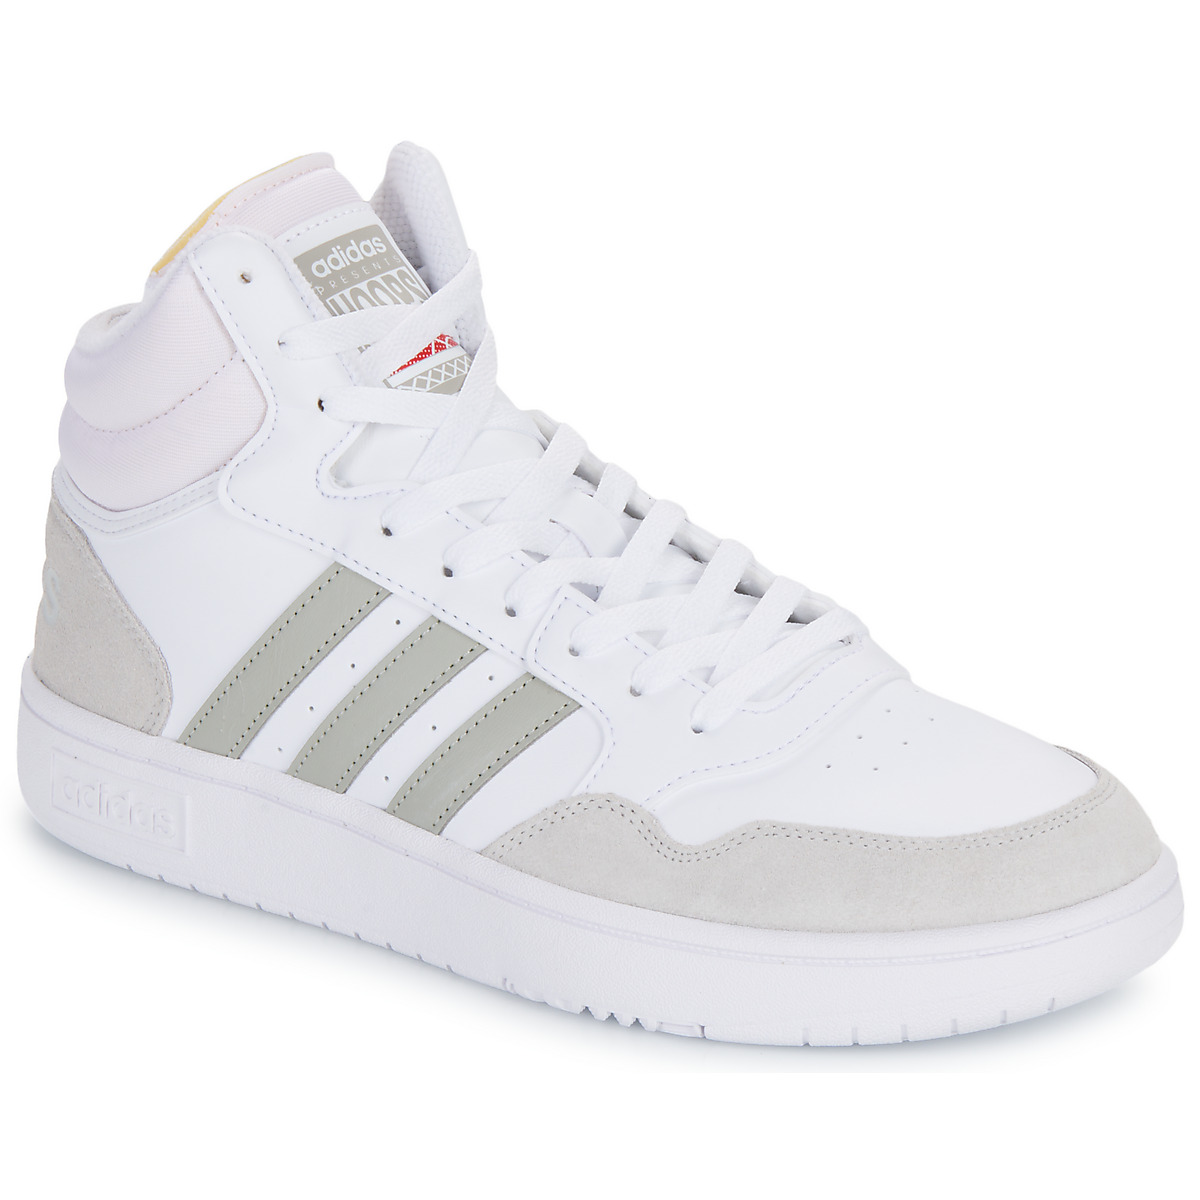 Adidas Hoops 3.0 Mid White